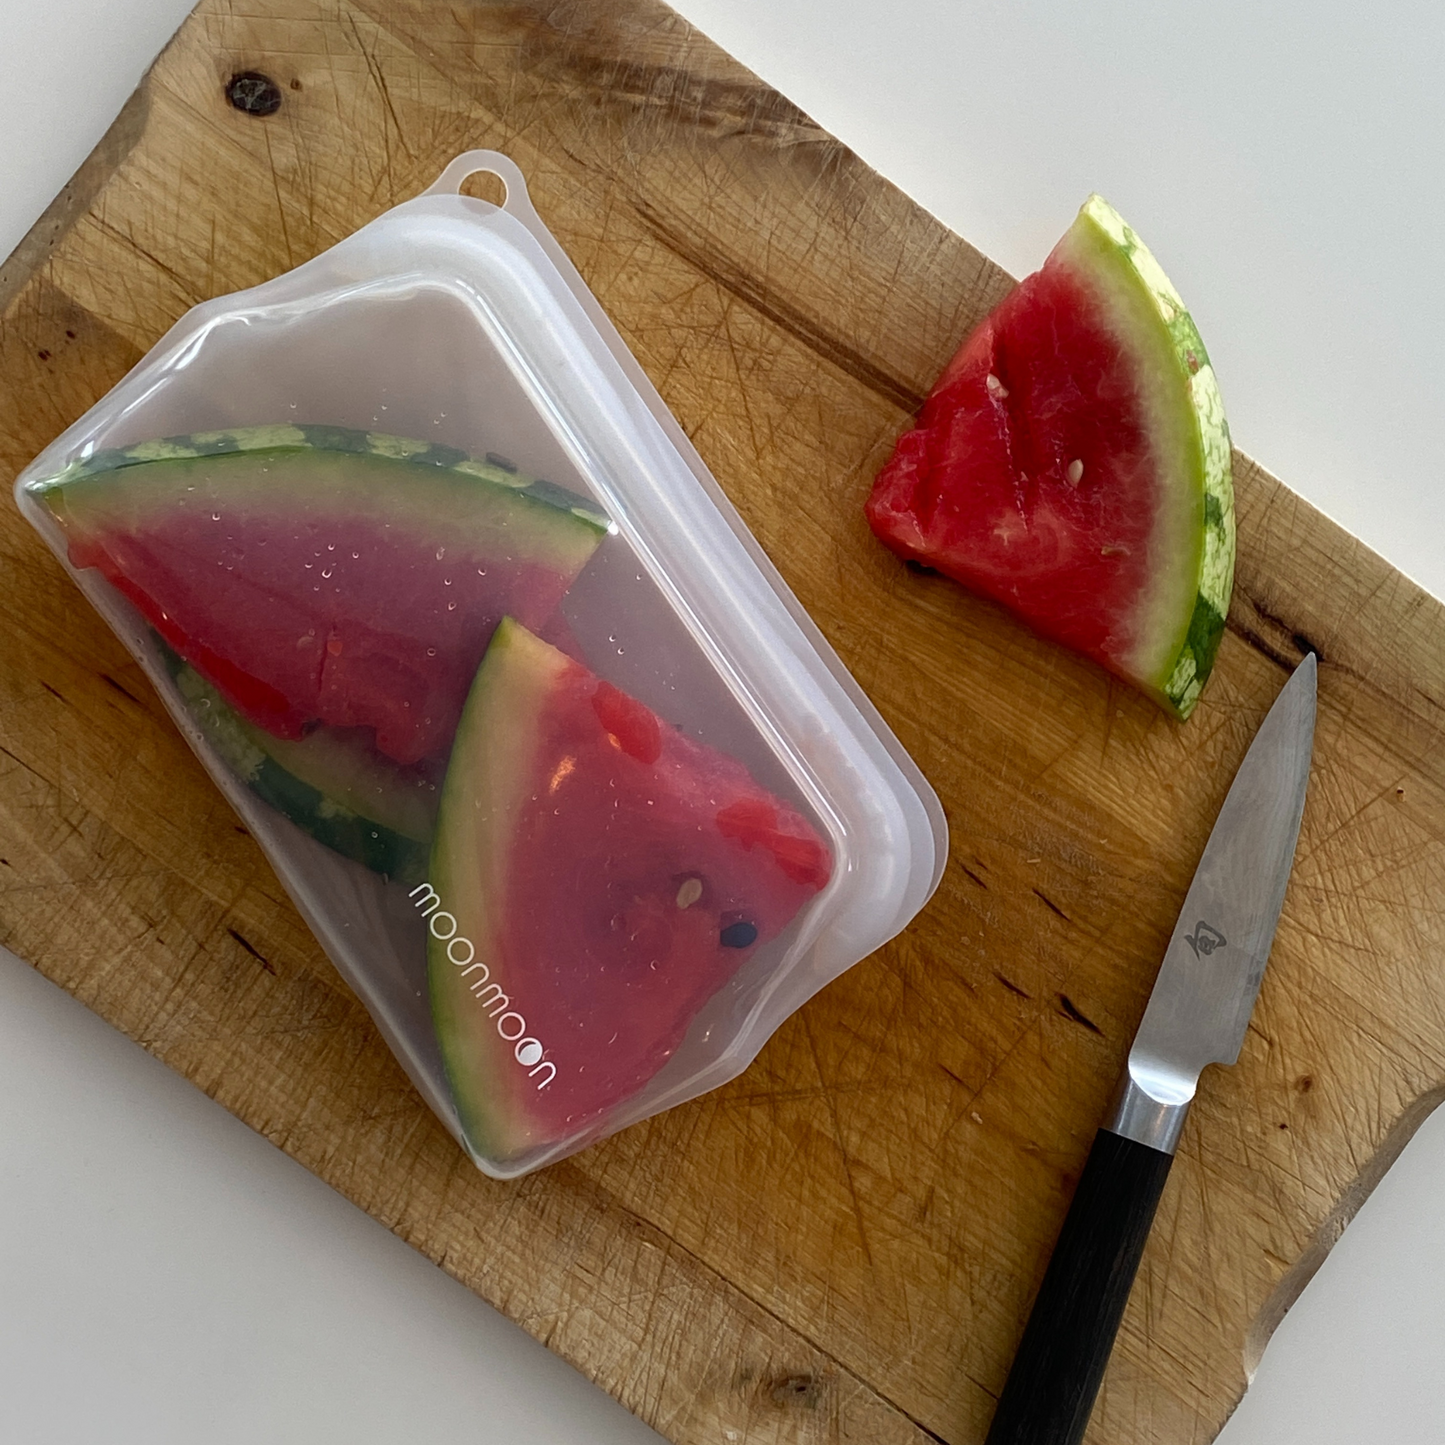 reusable silicone freezer bags uk, stasher bags, pouch bags